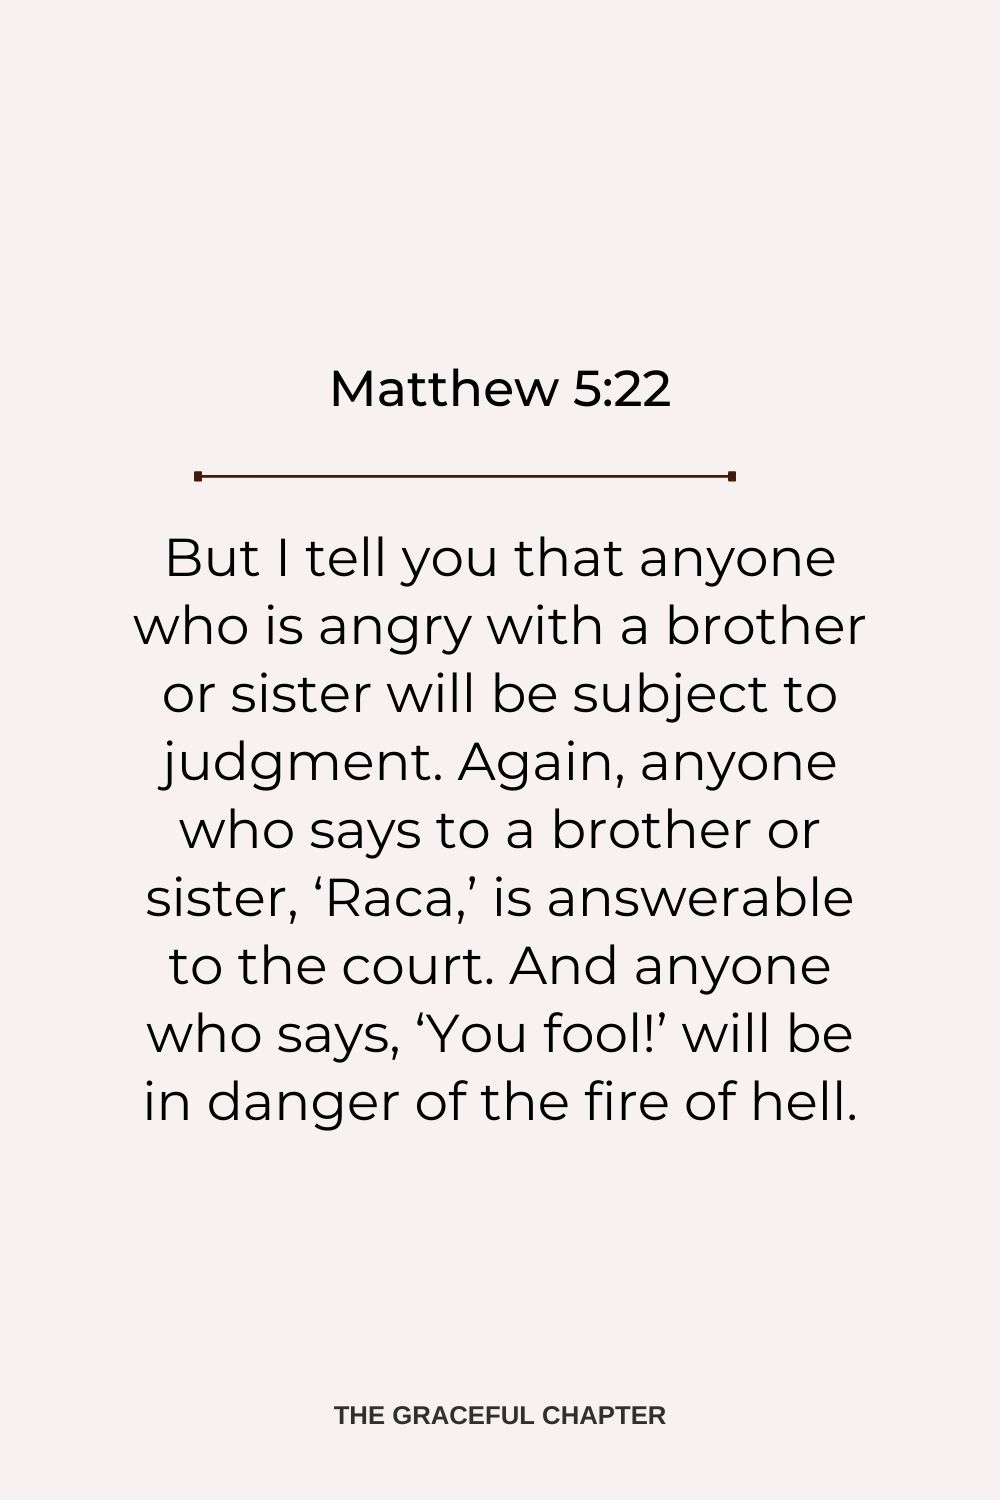 But I tell you that anyone Matthew 5:22who is angry with a brother or sister will be subject to judgment. Again, anyone who says to a brother or sister, ‘Raca,’ is answerable to the court. And anyone who says, ‘You fool!’ will be in danger of the fire of hell. Matthew 5:22